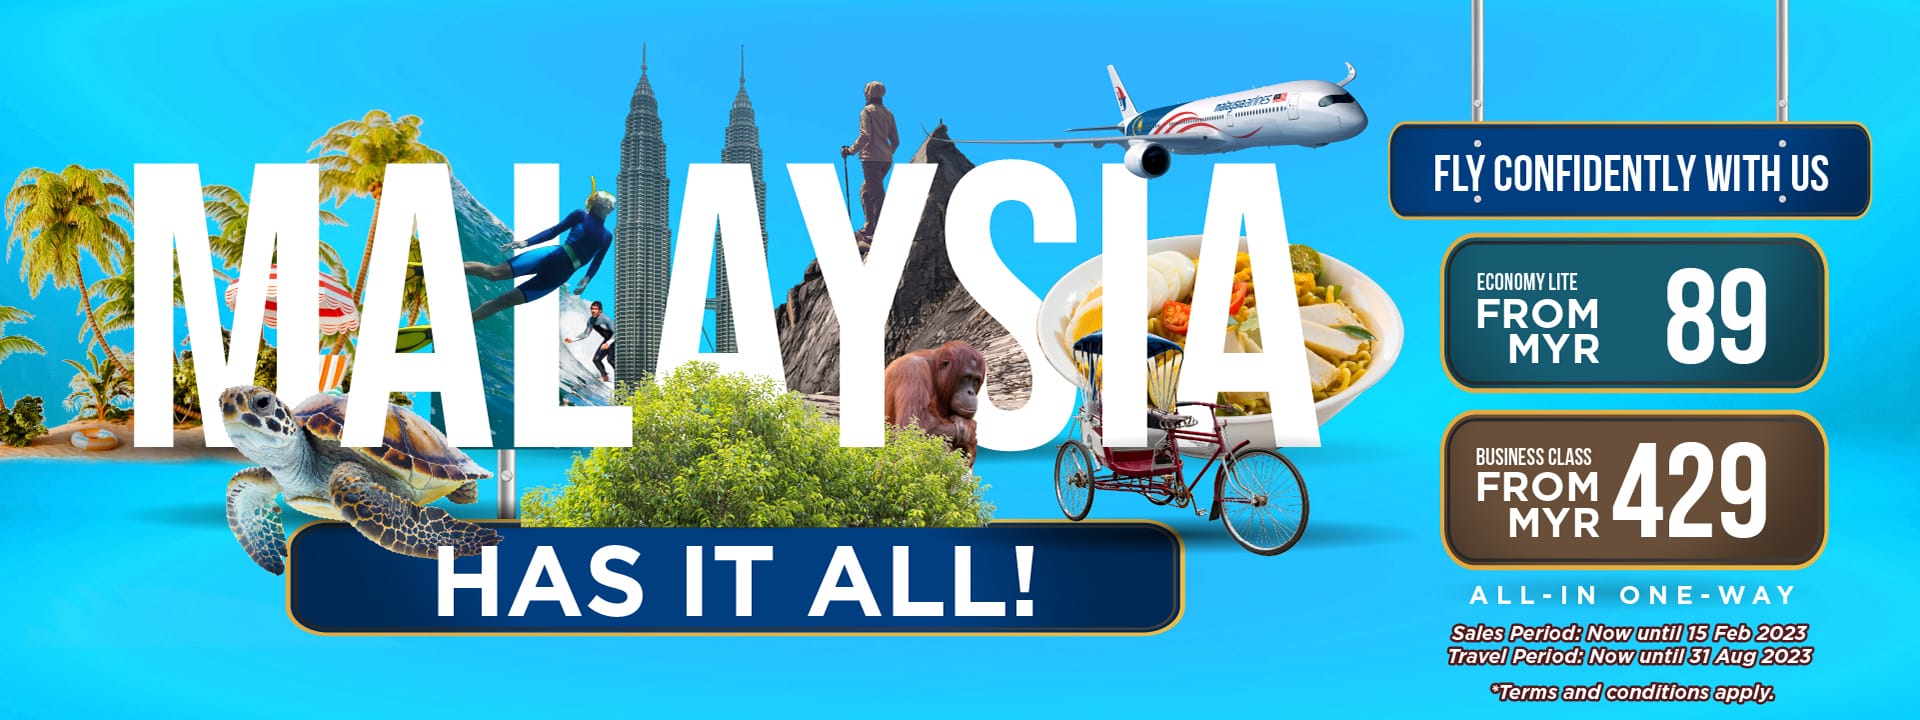 Malaysia Airlines - Discover it all in Malaysia wb malaysia has it all